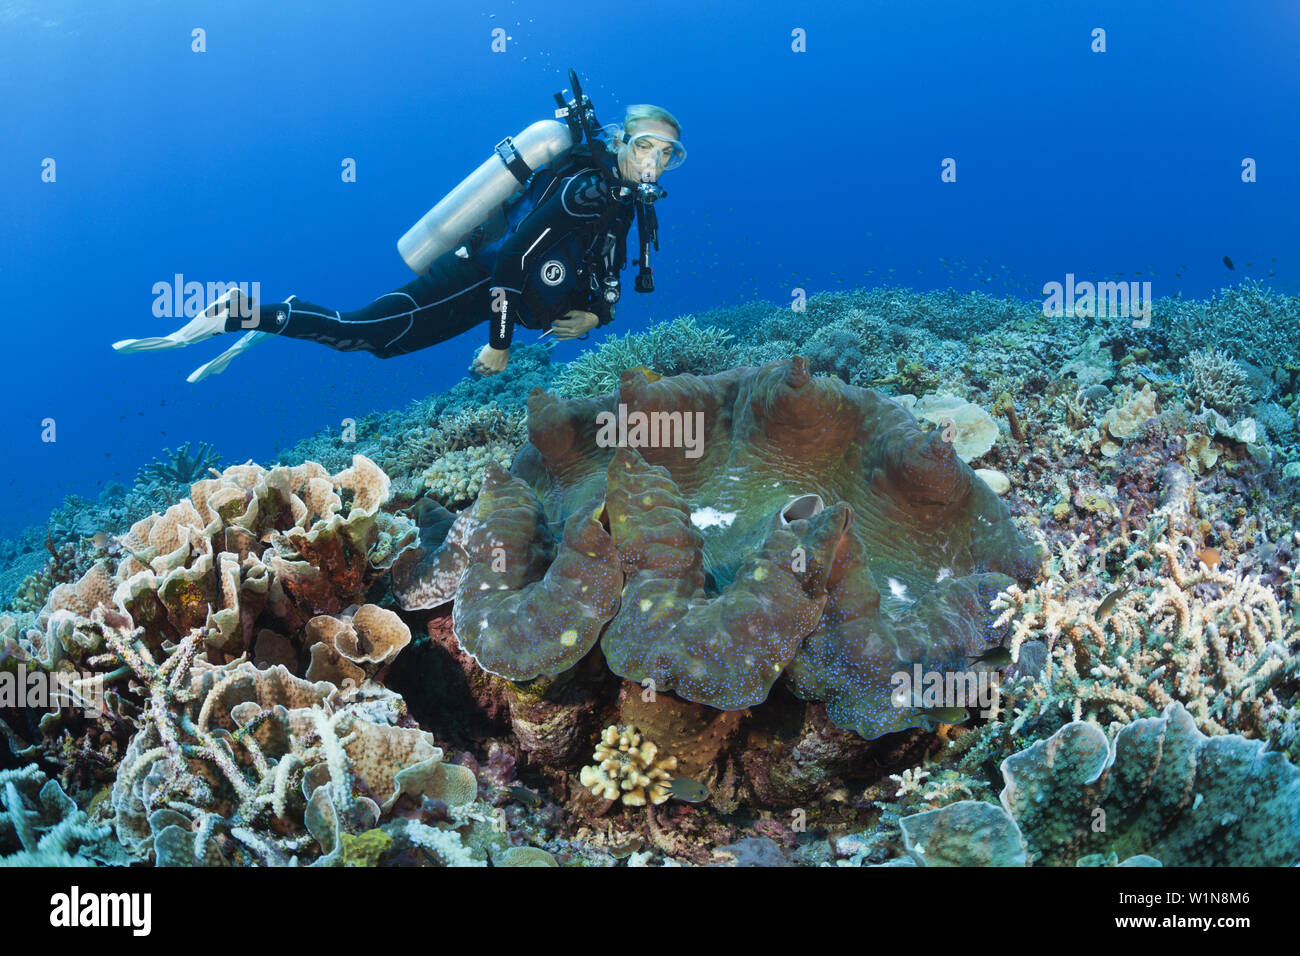 Giant Clam in Coral Reef, Tridacna squamosa, Mary Island, Solomon Islands Stock Photo